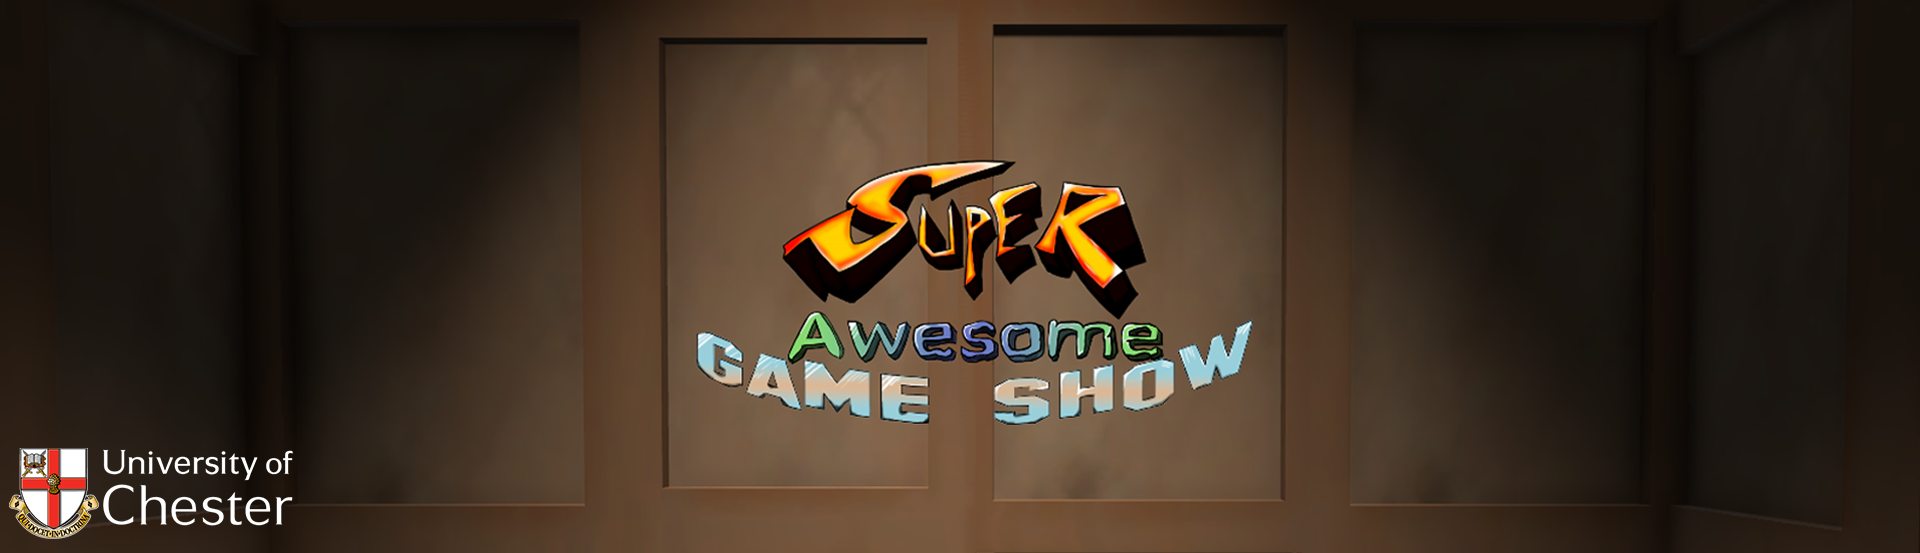 Super Awesome Game Show